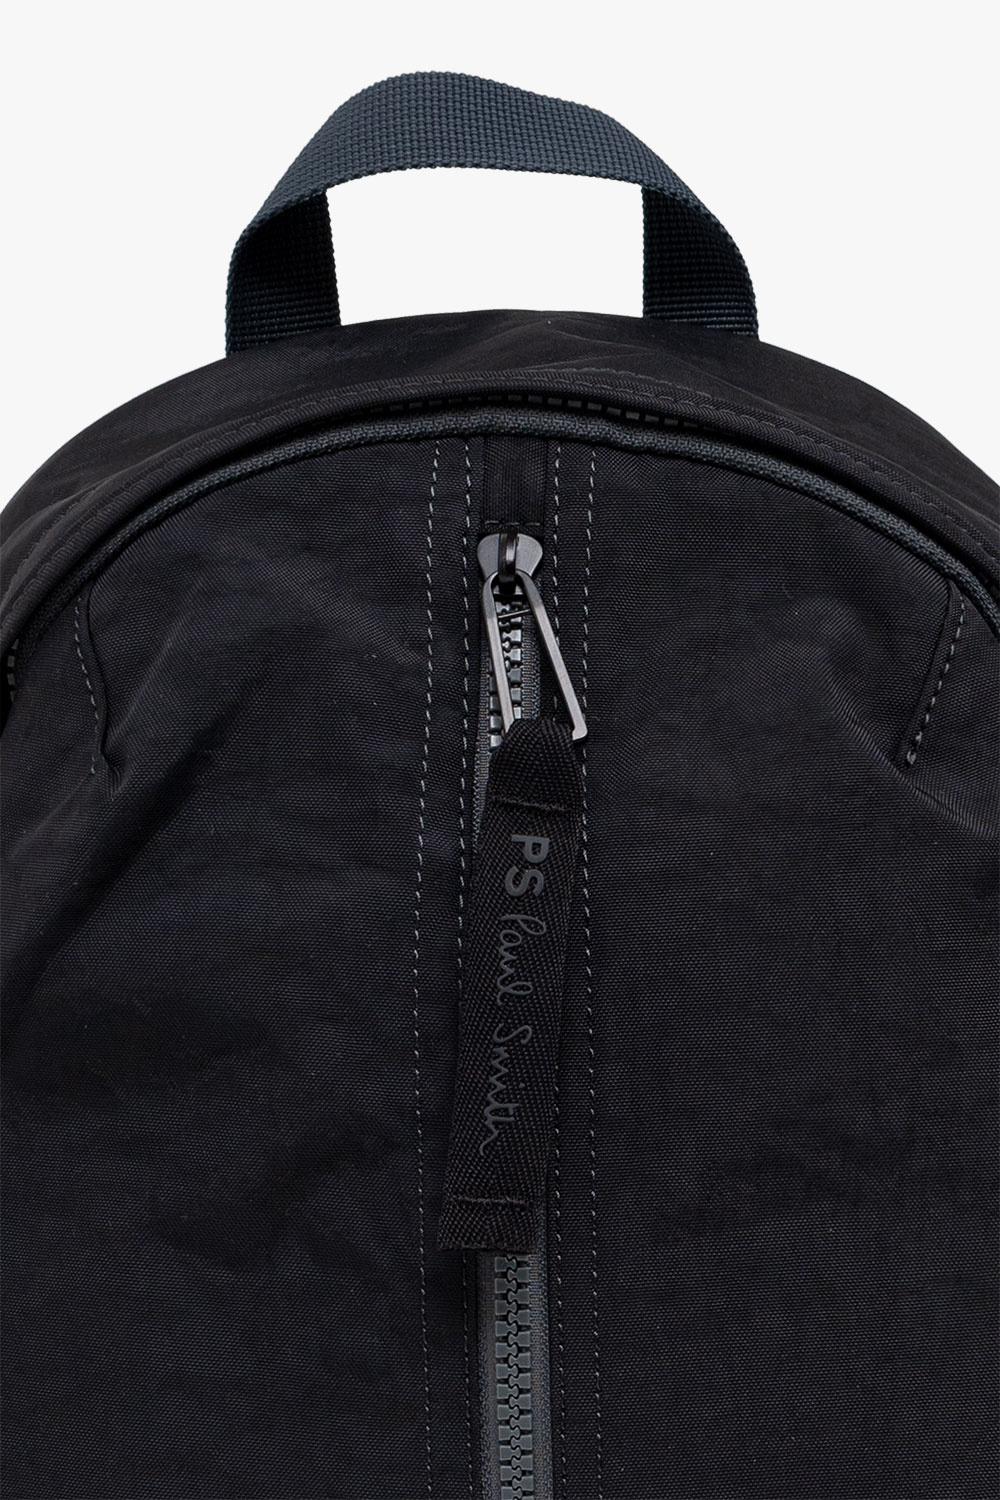 PS Paul Smith buy puma small essential logo backpack